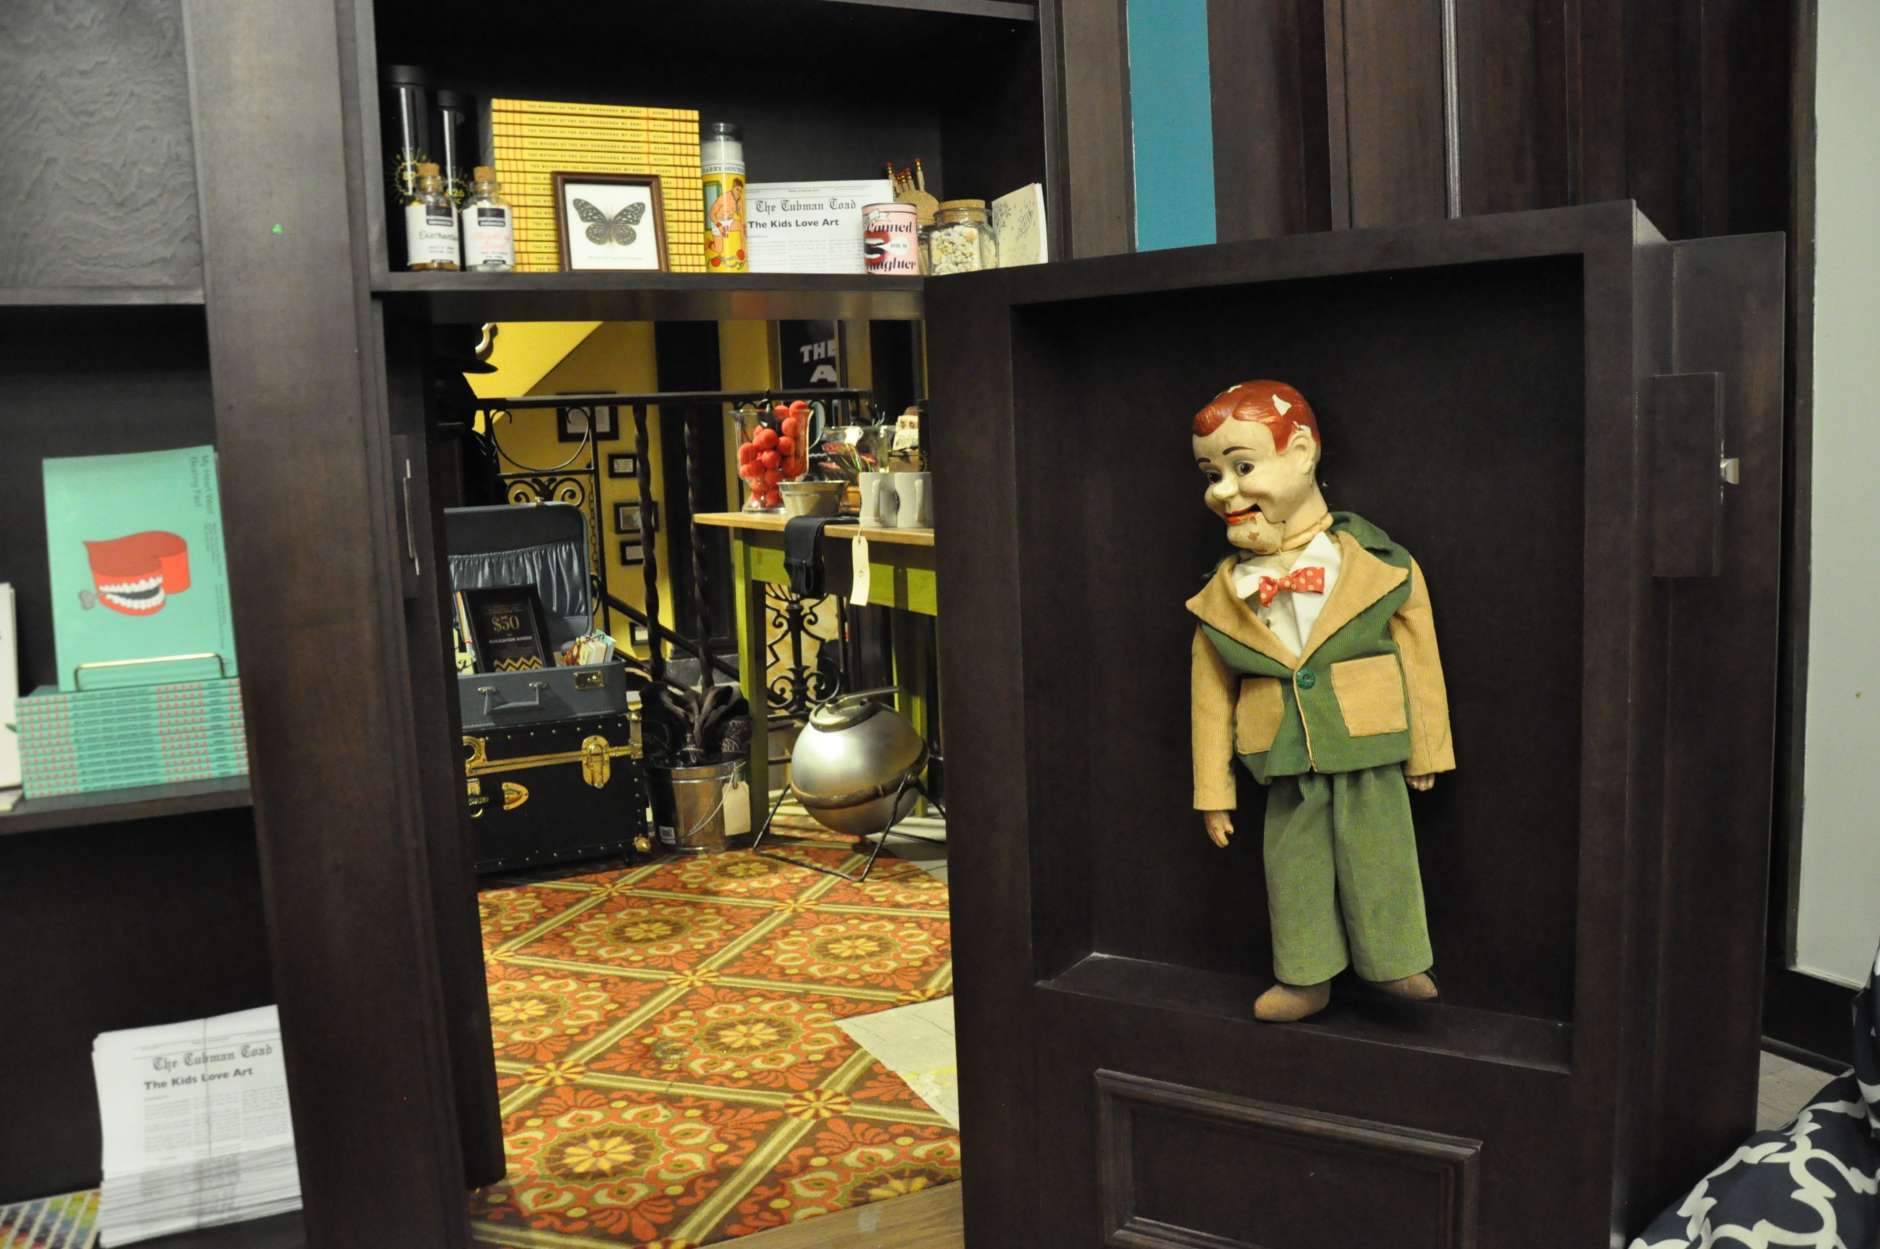 Inside Tivoli’s Astounding Magic Supply Company, wands, capes and candles are available for purchase. But behind a trap door — guarded by a ventriloquist doll — is where the real magic takes place. It's 826DC, a nonprofit writing center. (WTOP/Rachel Nania) 